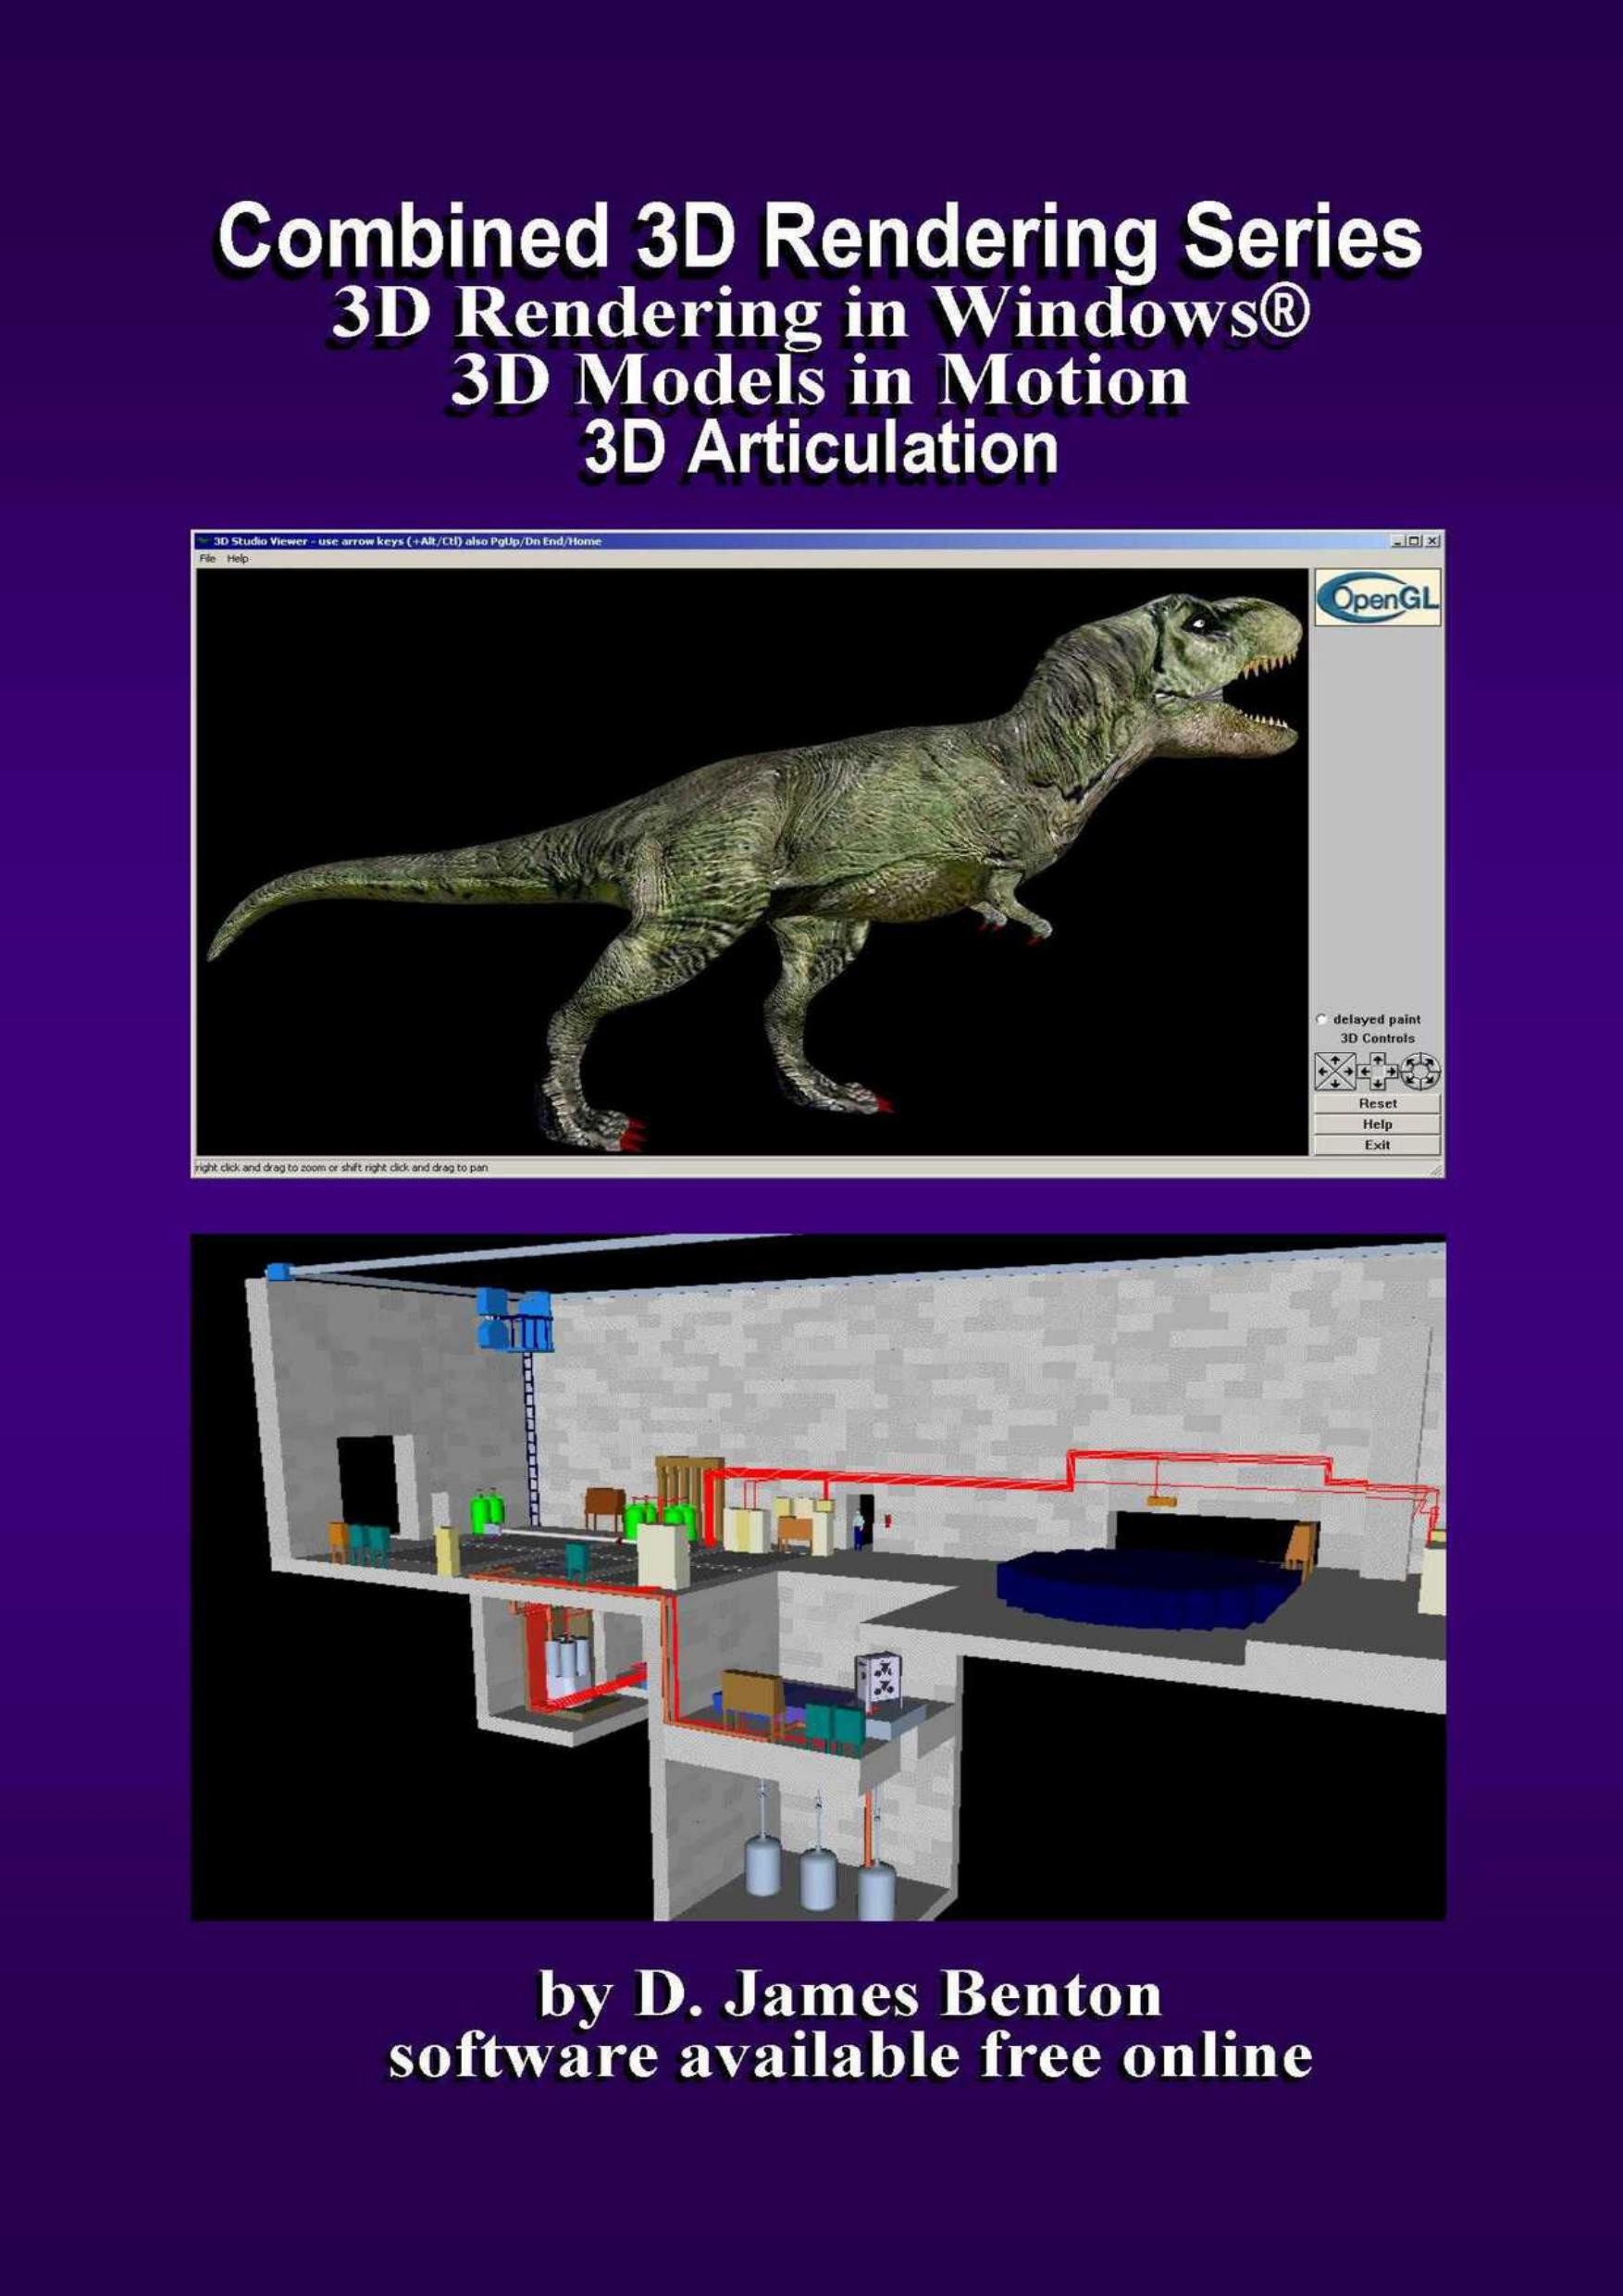 Combined 3D Rendering Series: 3D Rendering in Windows, 3D Models in Motion, and 3D Articulation by Benton D. James